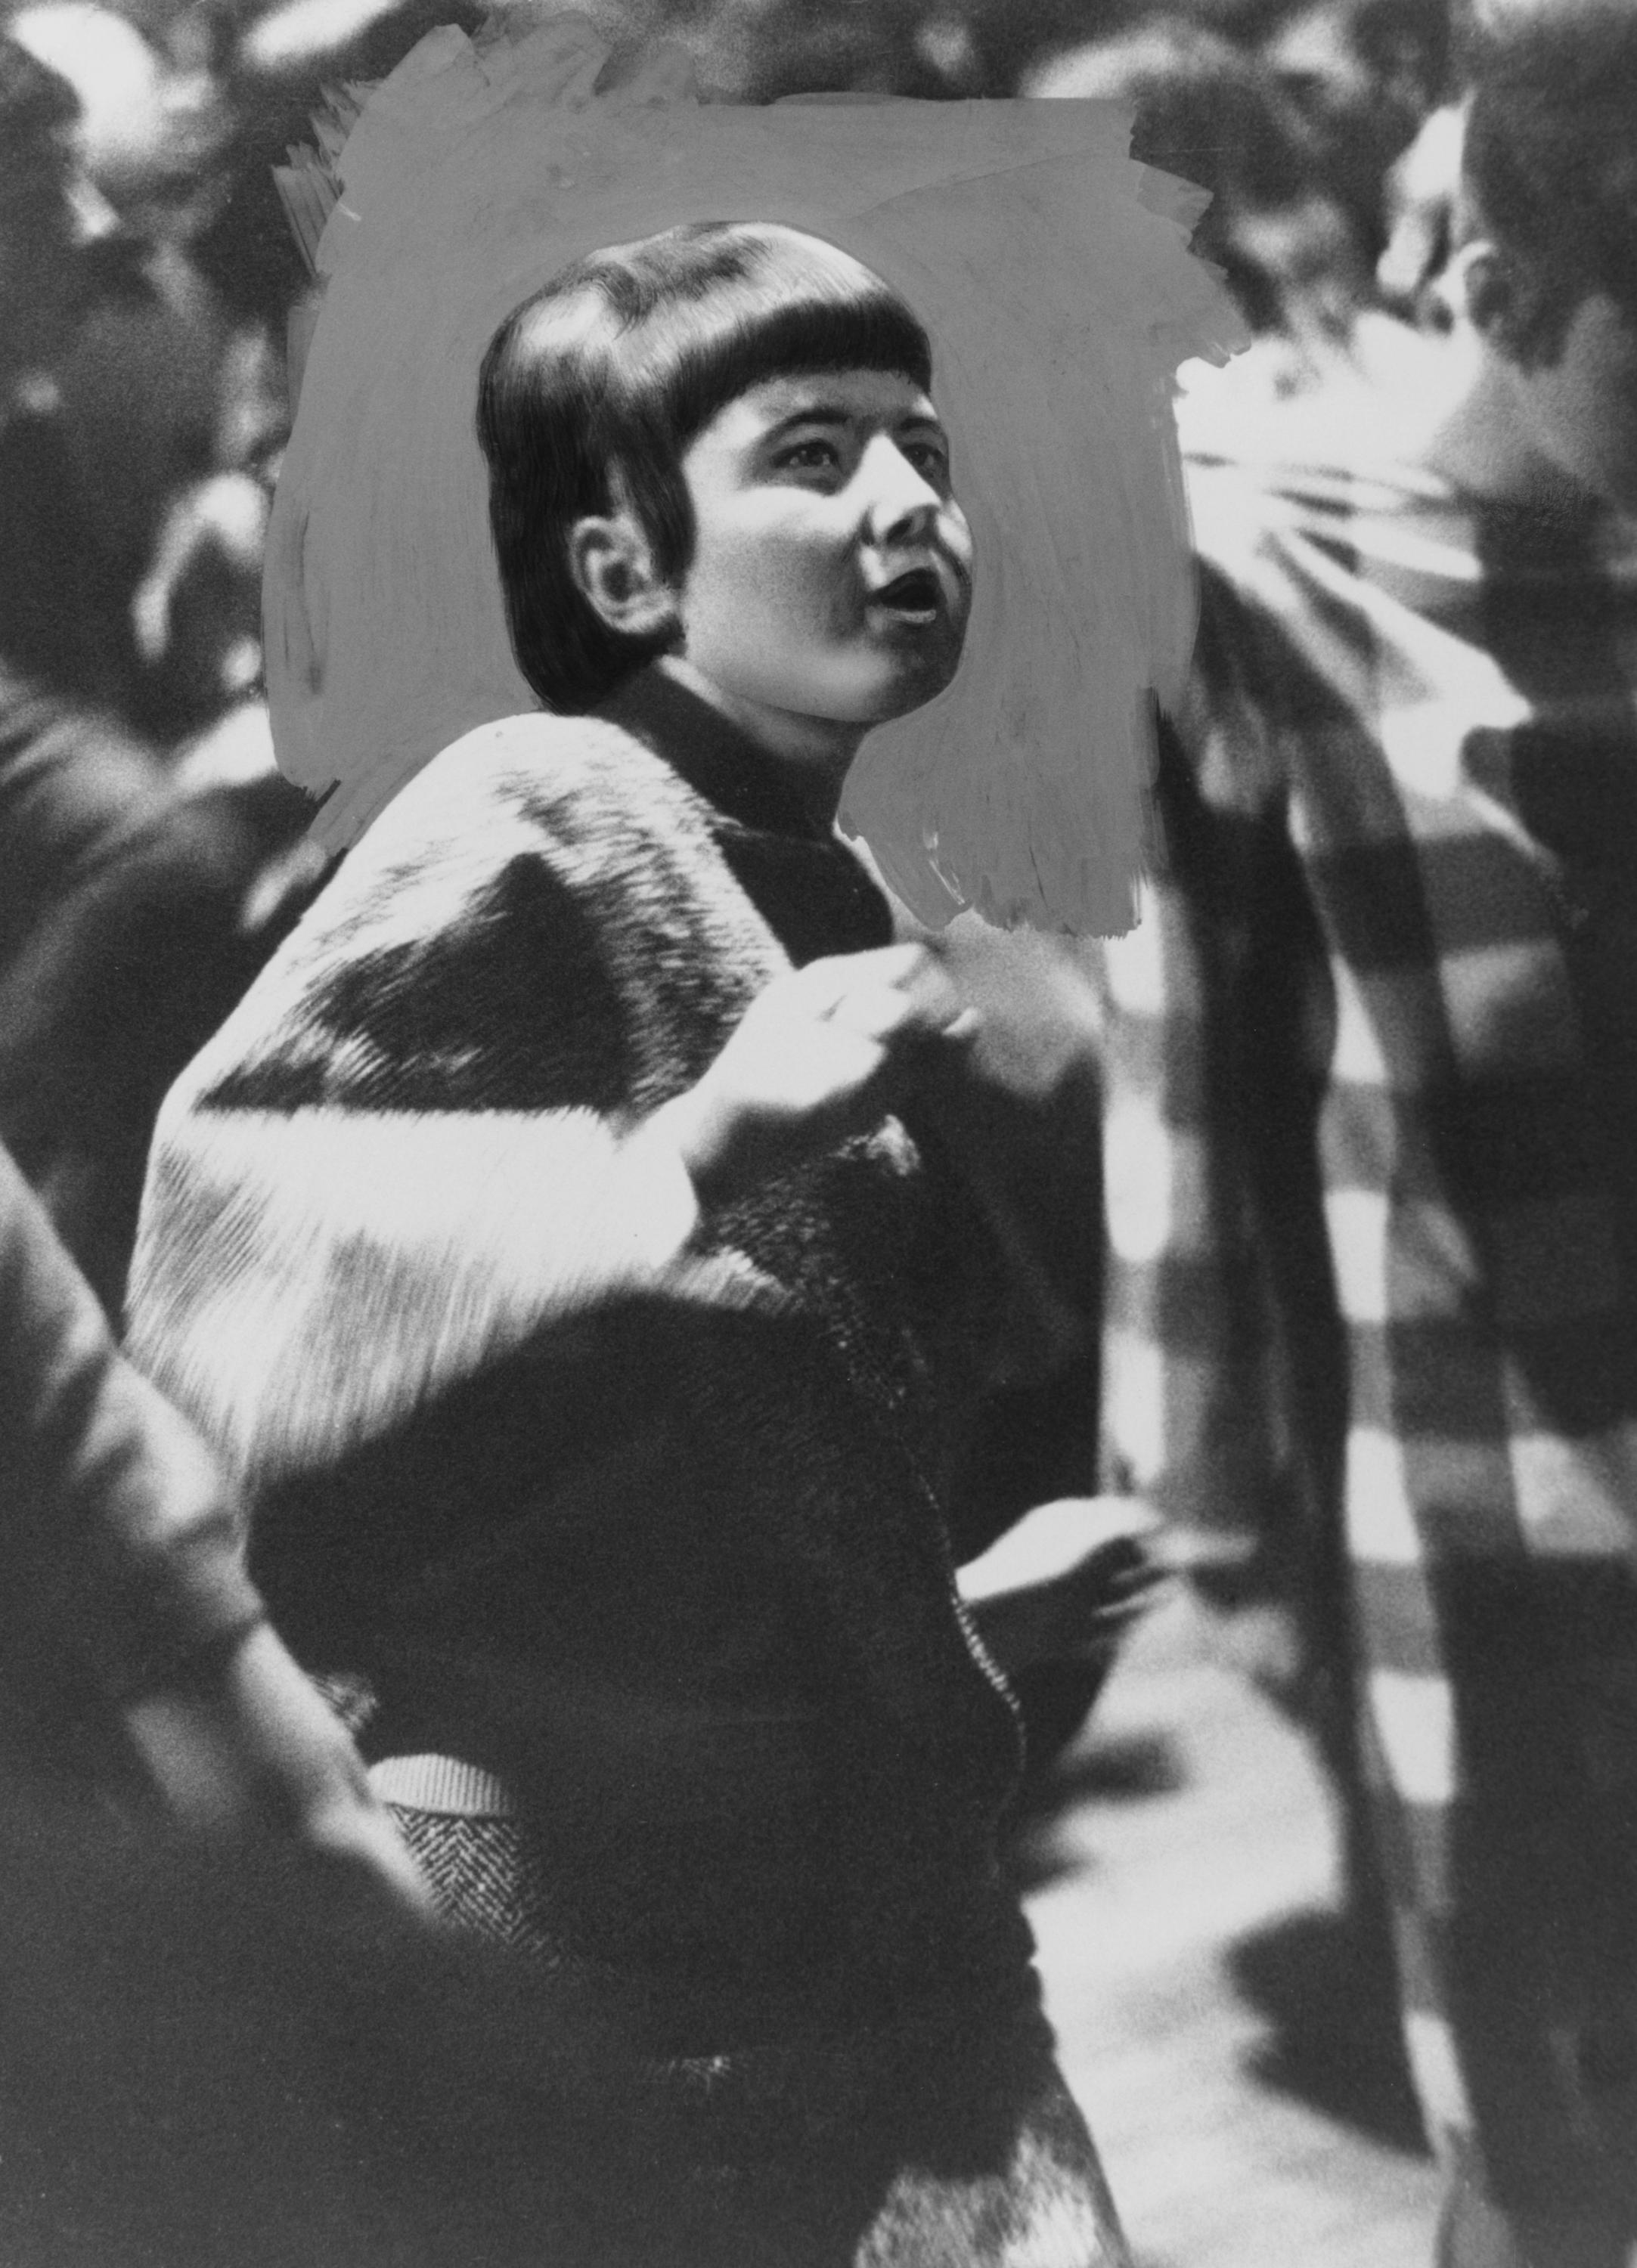 A young mod girl with Beatle haircut. Image: Daily Herald (DHA) Archive at the National Media Museum, Bradford.